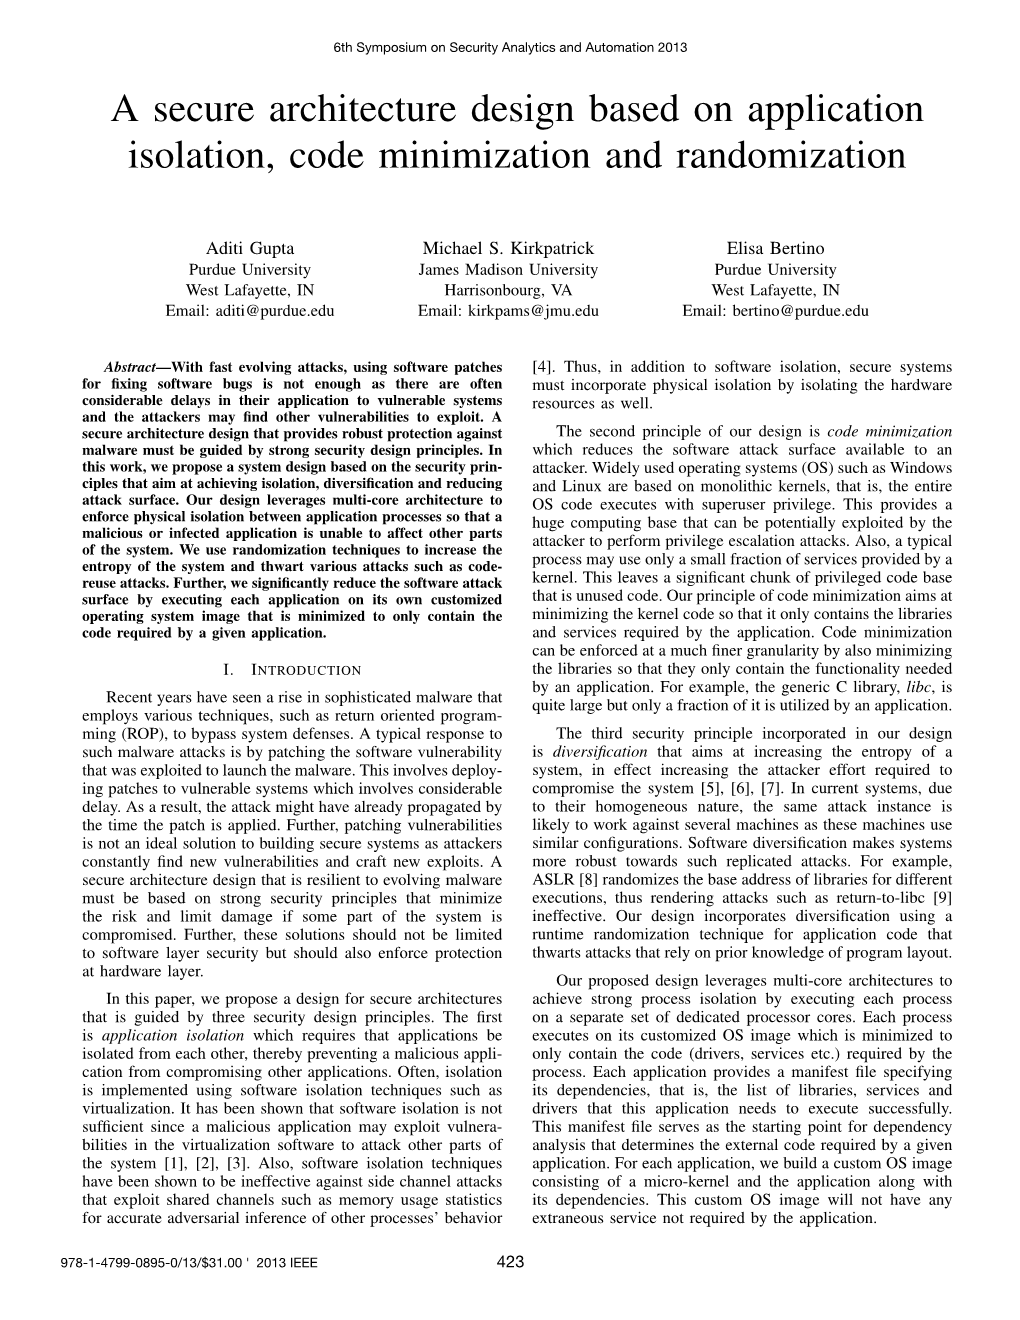 A Secure Architecture Design Based on Application Isolation, Code Minimization and Randomization